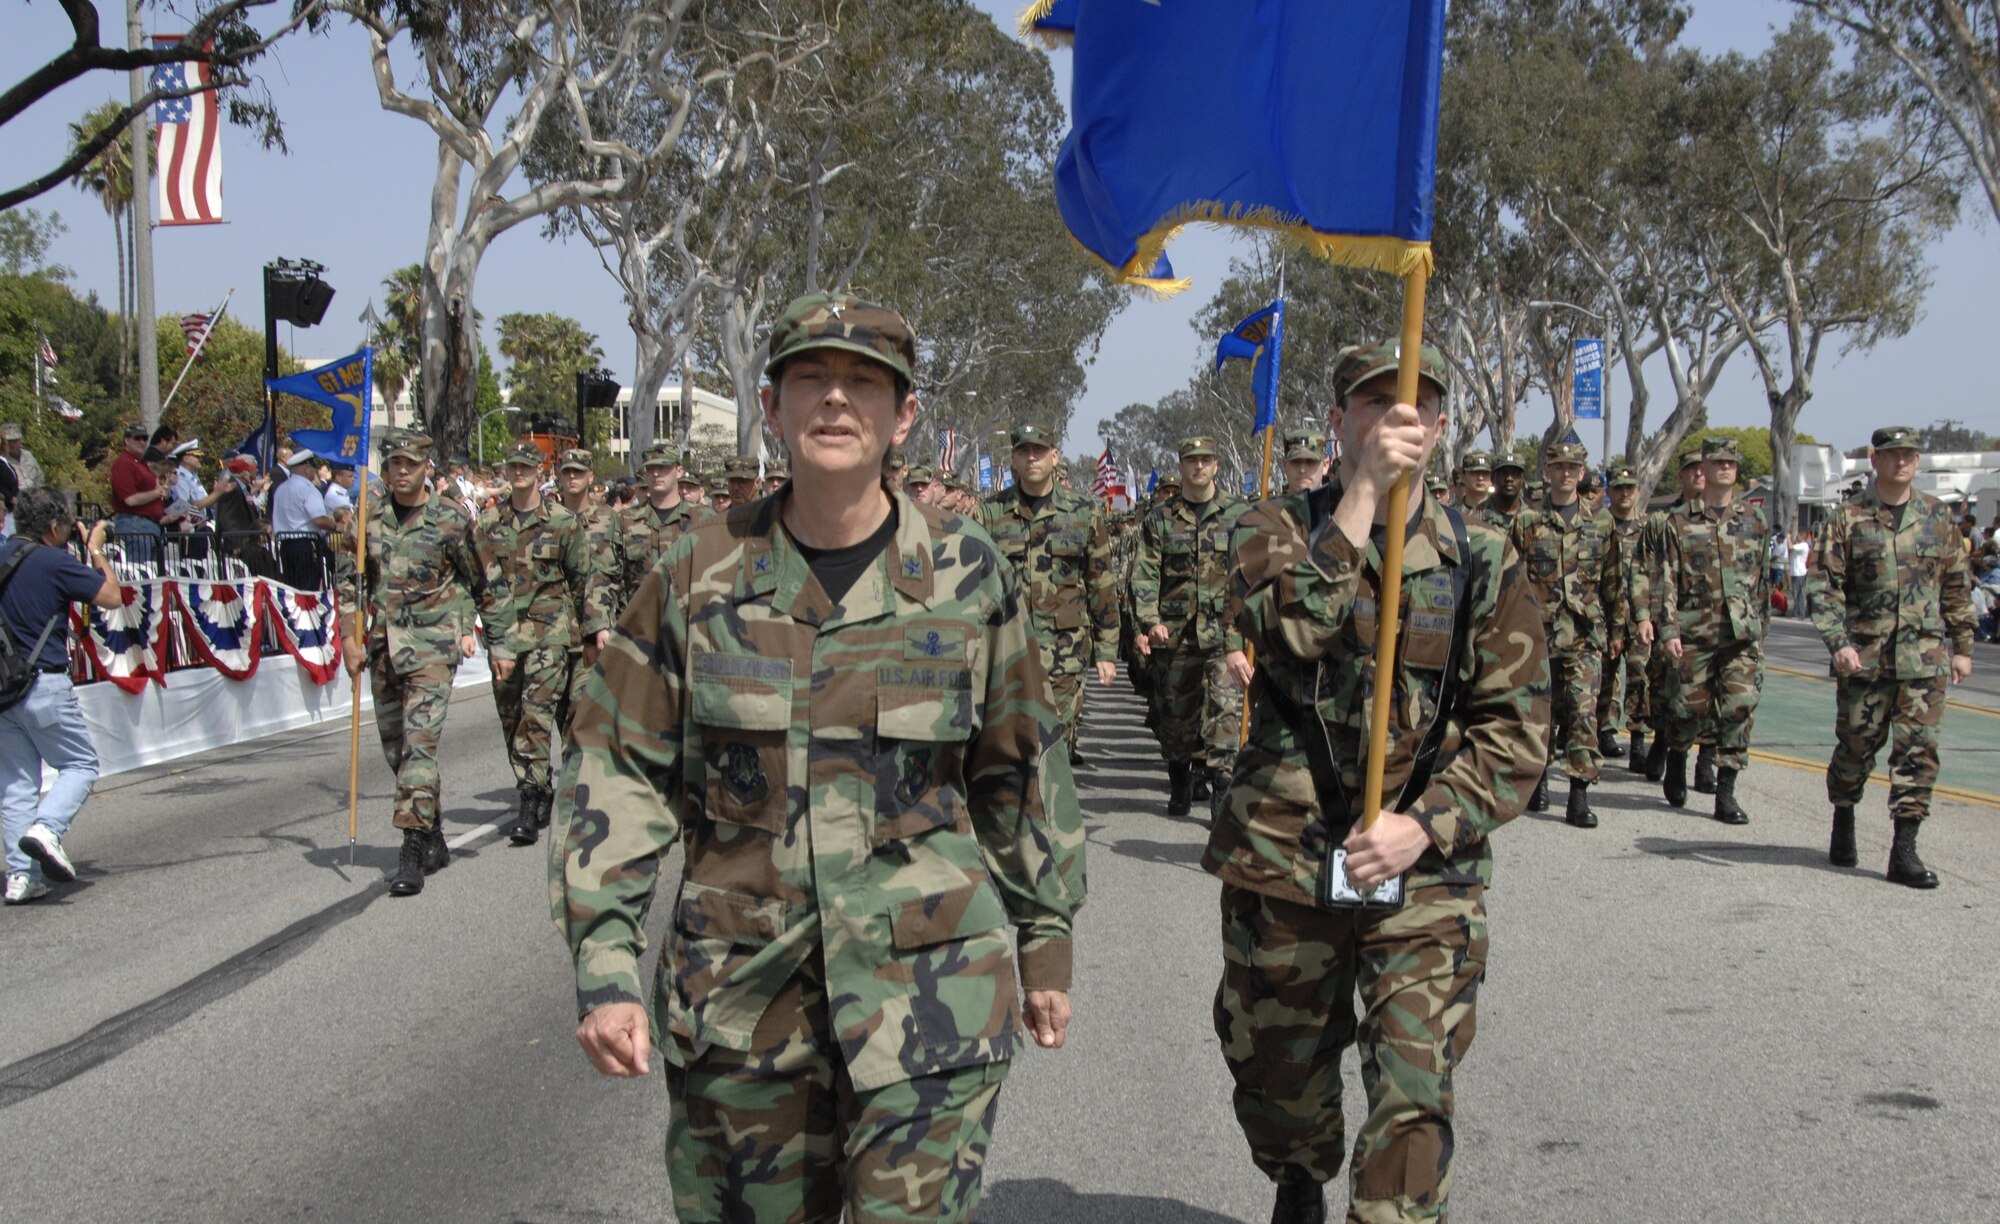 Brig. Gen. Ellen Pawlikowski, MILSATCOM Systems Wing commander, leads the LAAFB Marching Unit in the 2007 Torrance Armed Forces Day Parade, May 19. Gen. Kevin Chilton, Air Force Space Command commander, served as the Grand Marshal for the parade. A Los Angeles AFB honor guard led the way as Los Angeles, Edwards, and Vandenberg Air Force Bases and March Air Reserve Base marched passed the crowds with a total of more than 300 airmen participating. 
